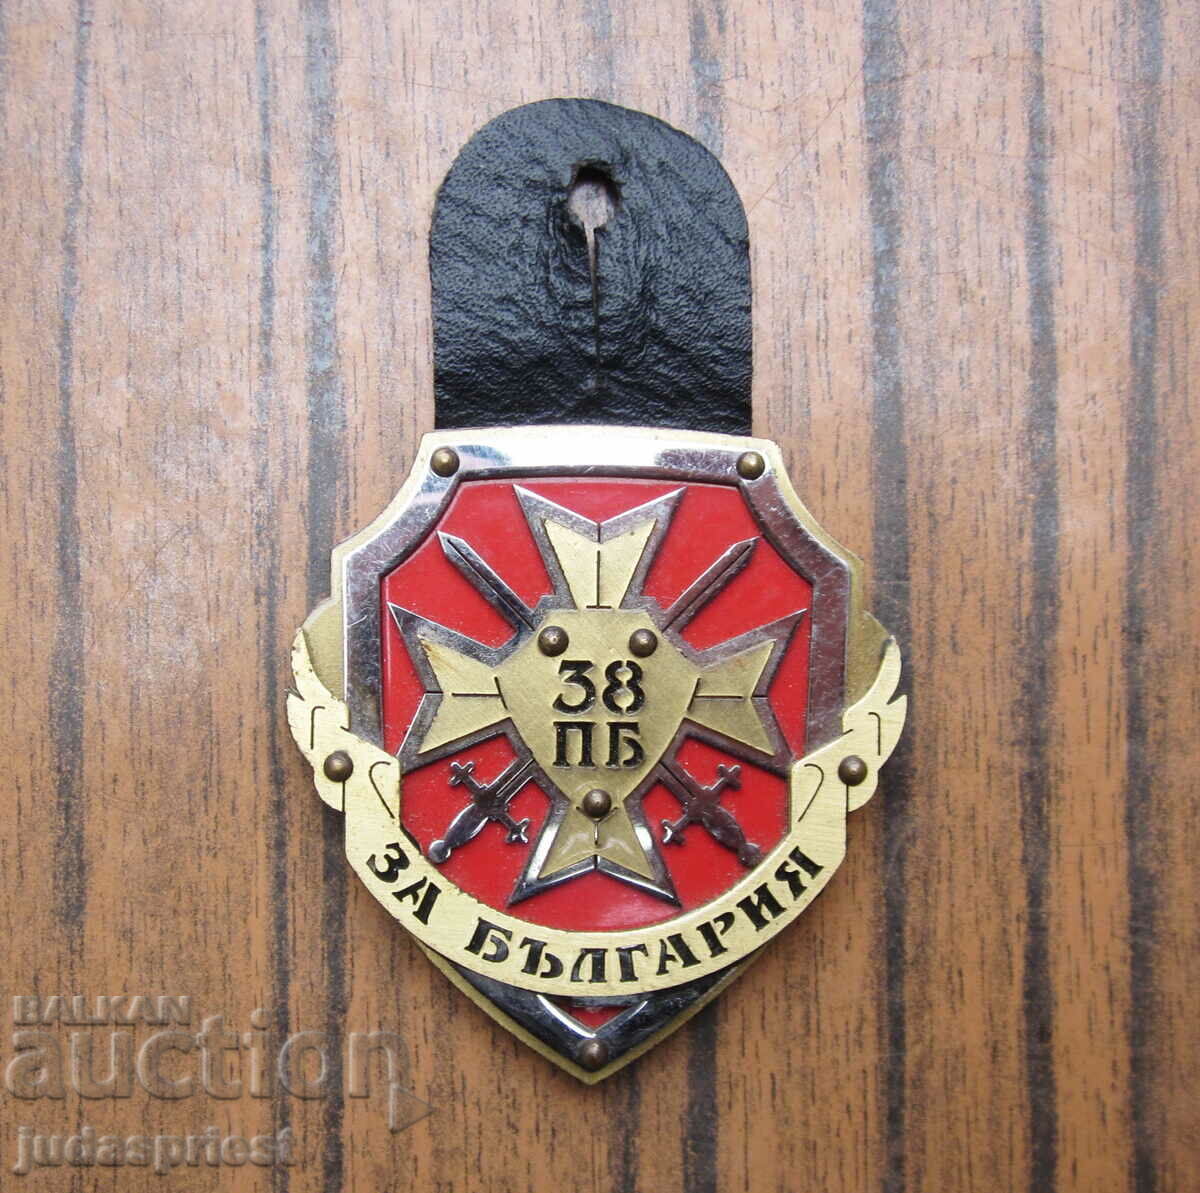 Bulgarian officer military insignia 38 infantry brigade